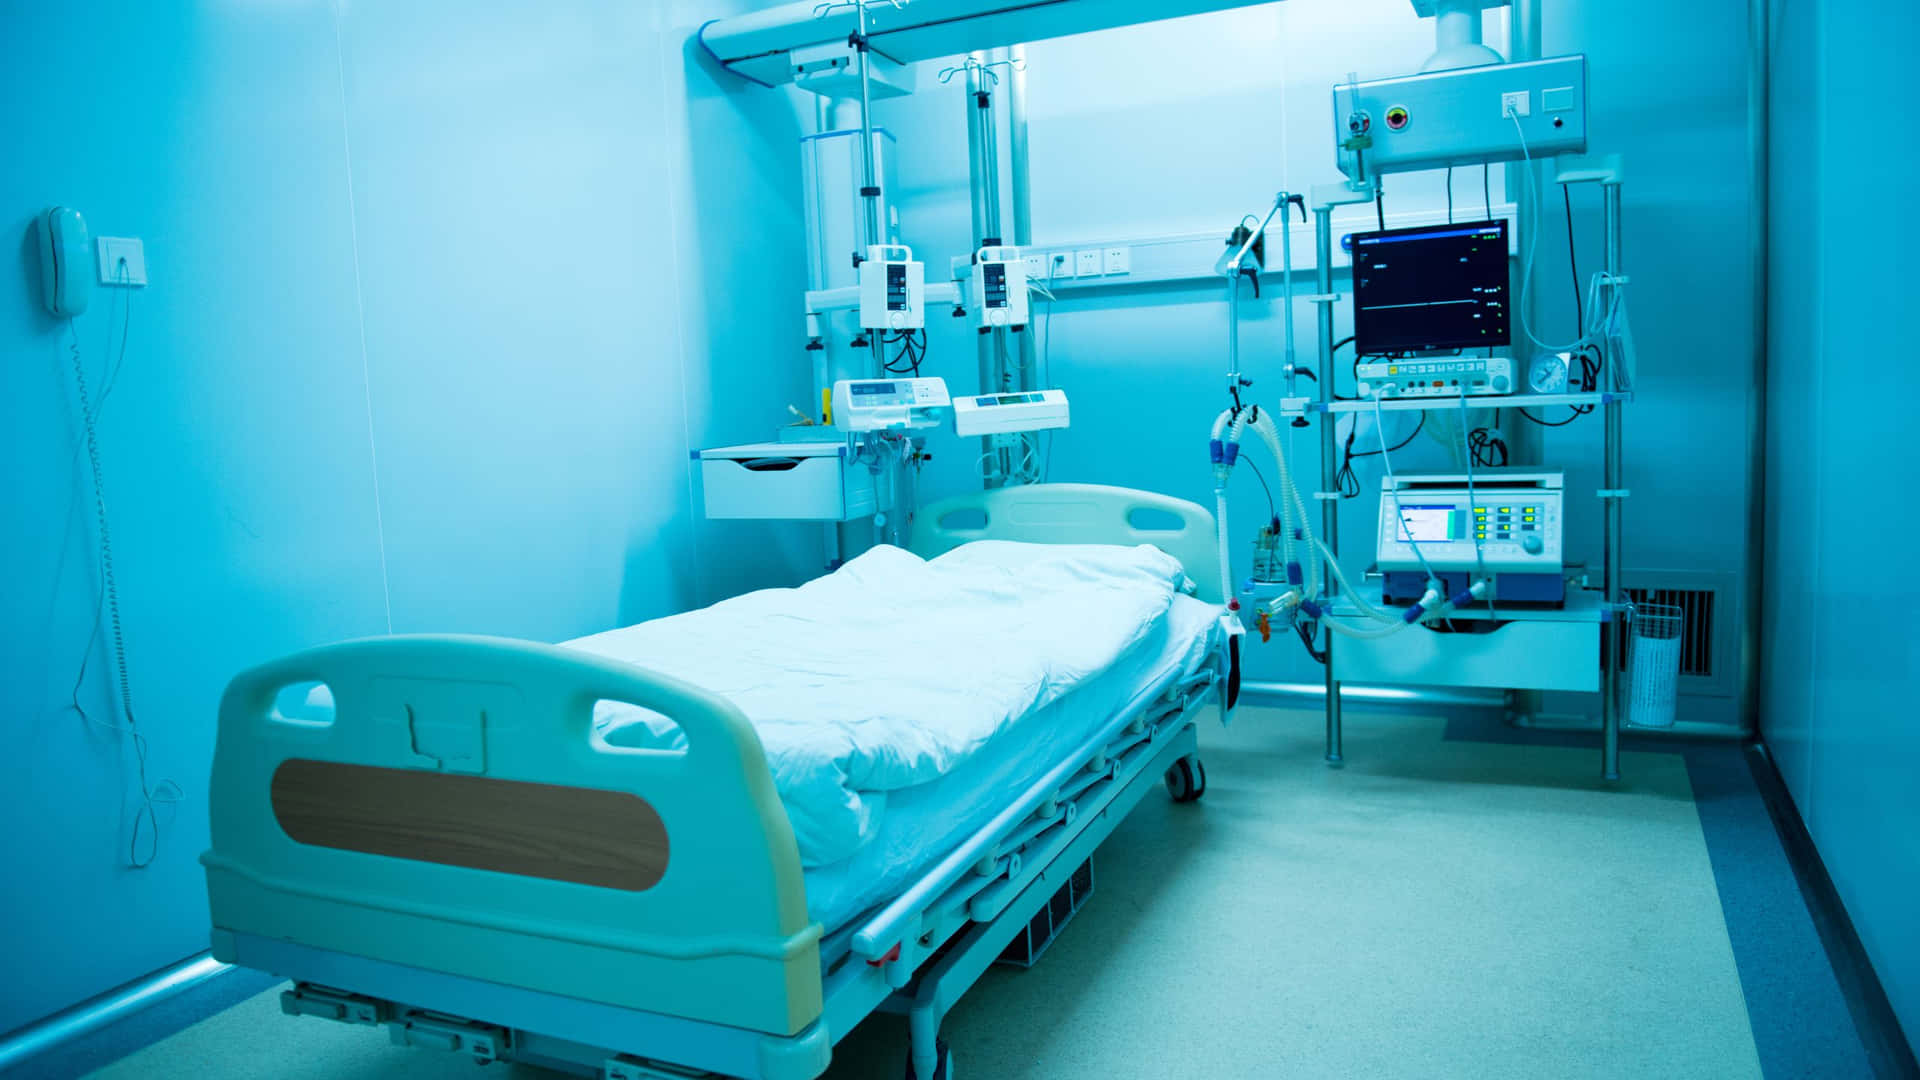 A Hospital Room With A Bed And Medical Equipment